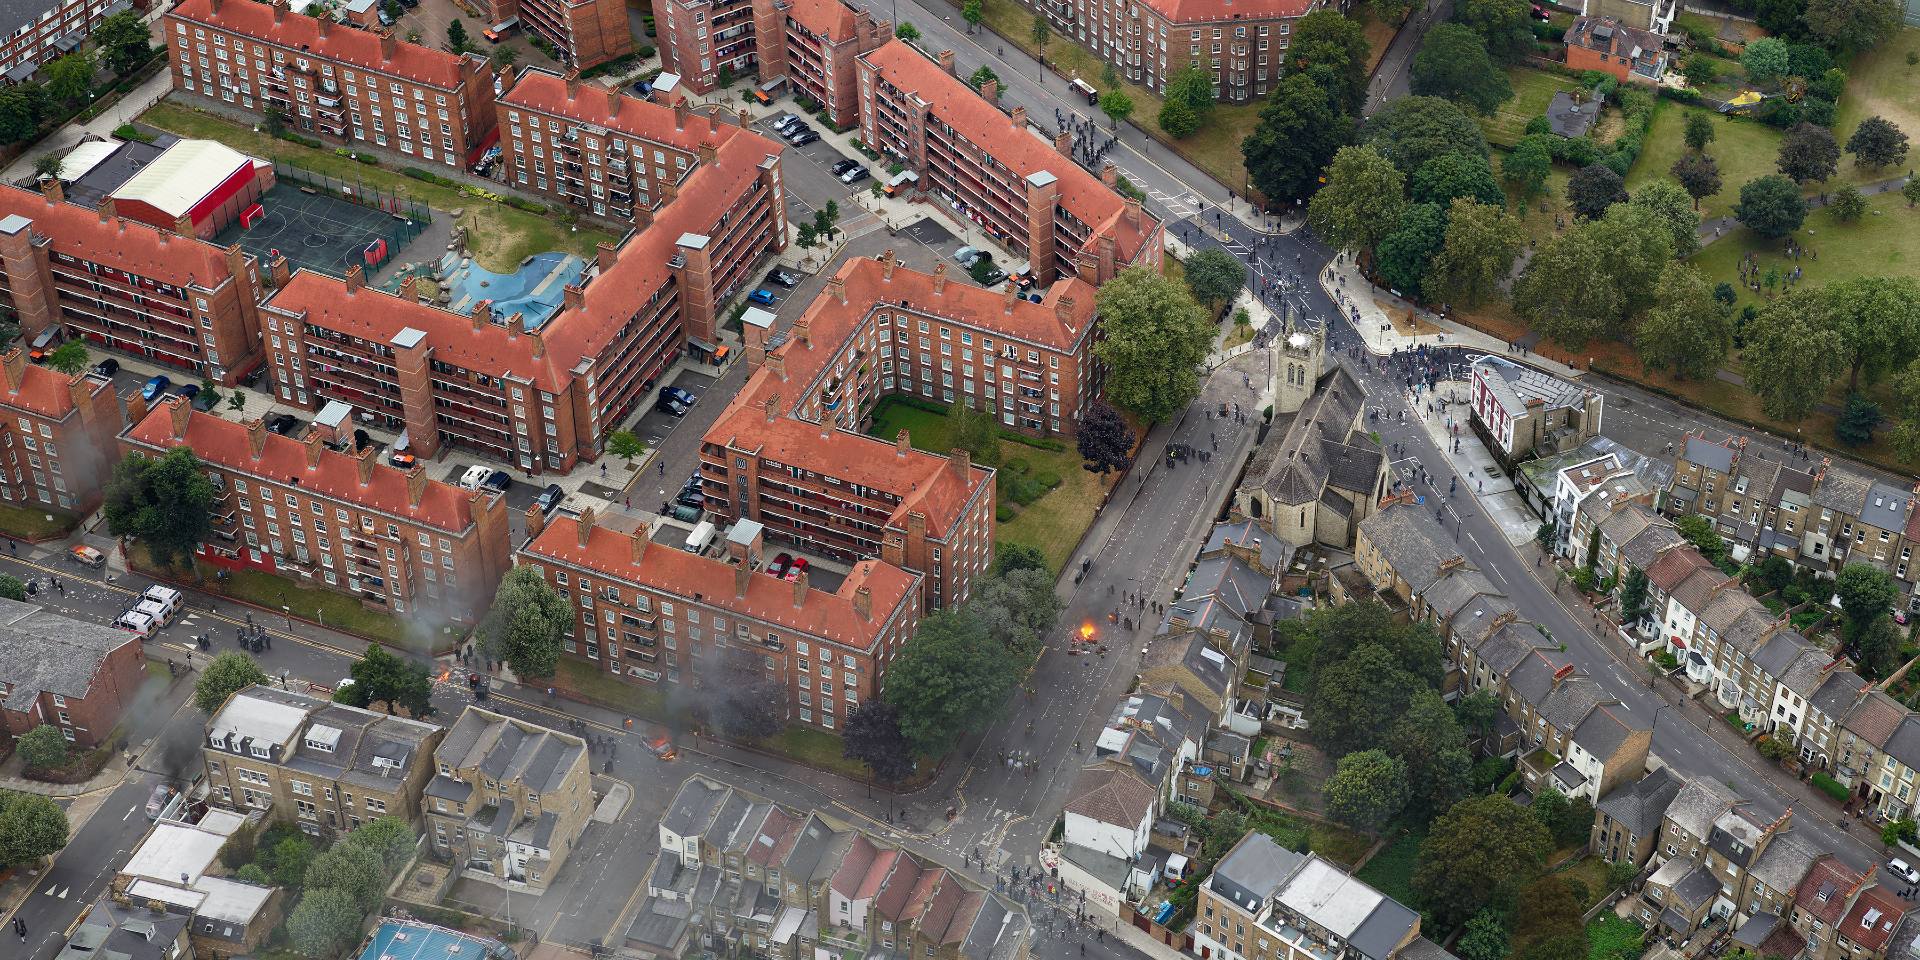 An aerial shot of the Pembury Estate housing complex in red brick and the surrounding streets. Small fires are igniting in the streets, emitting plumes of black smoke. 